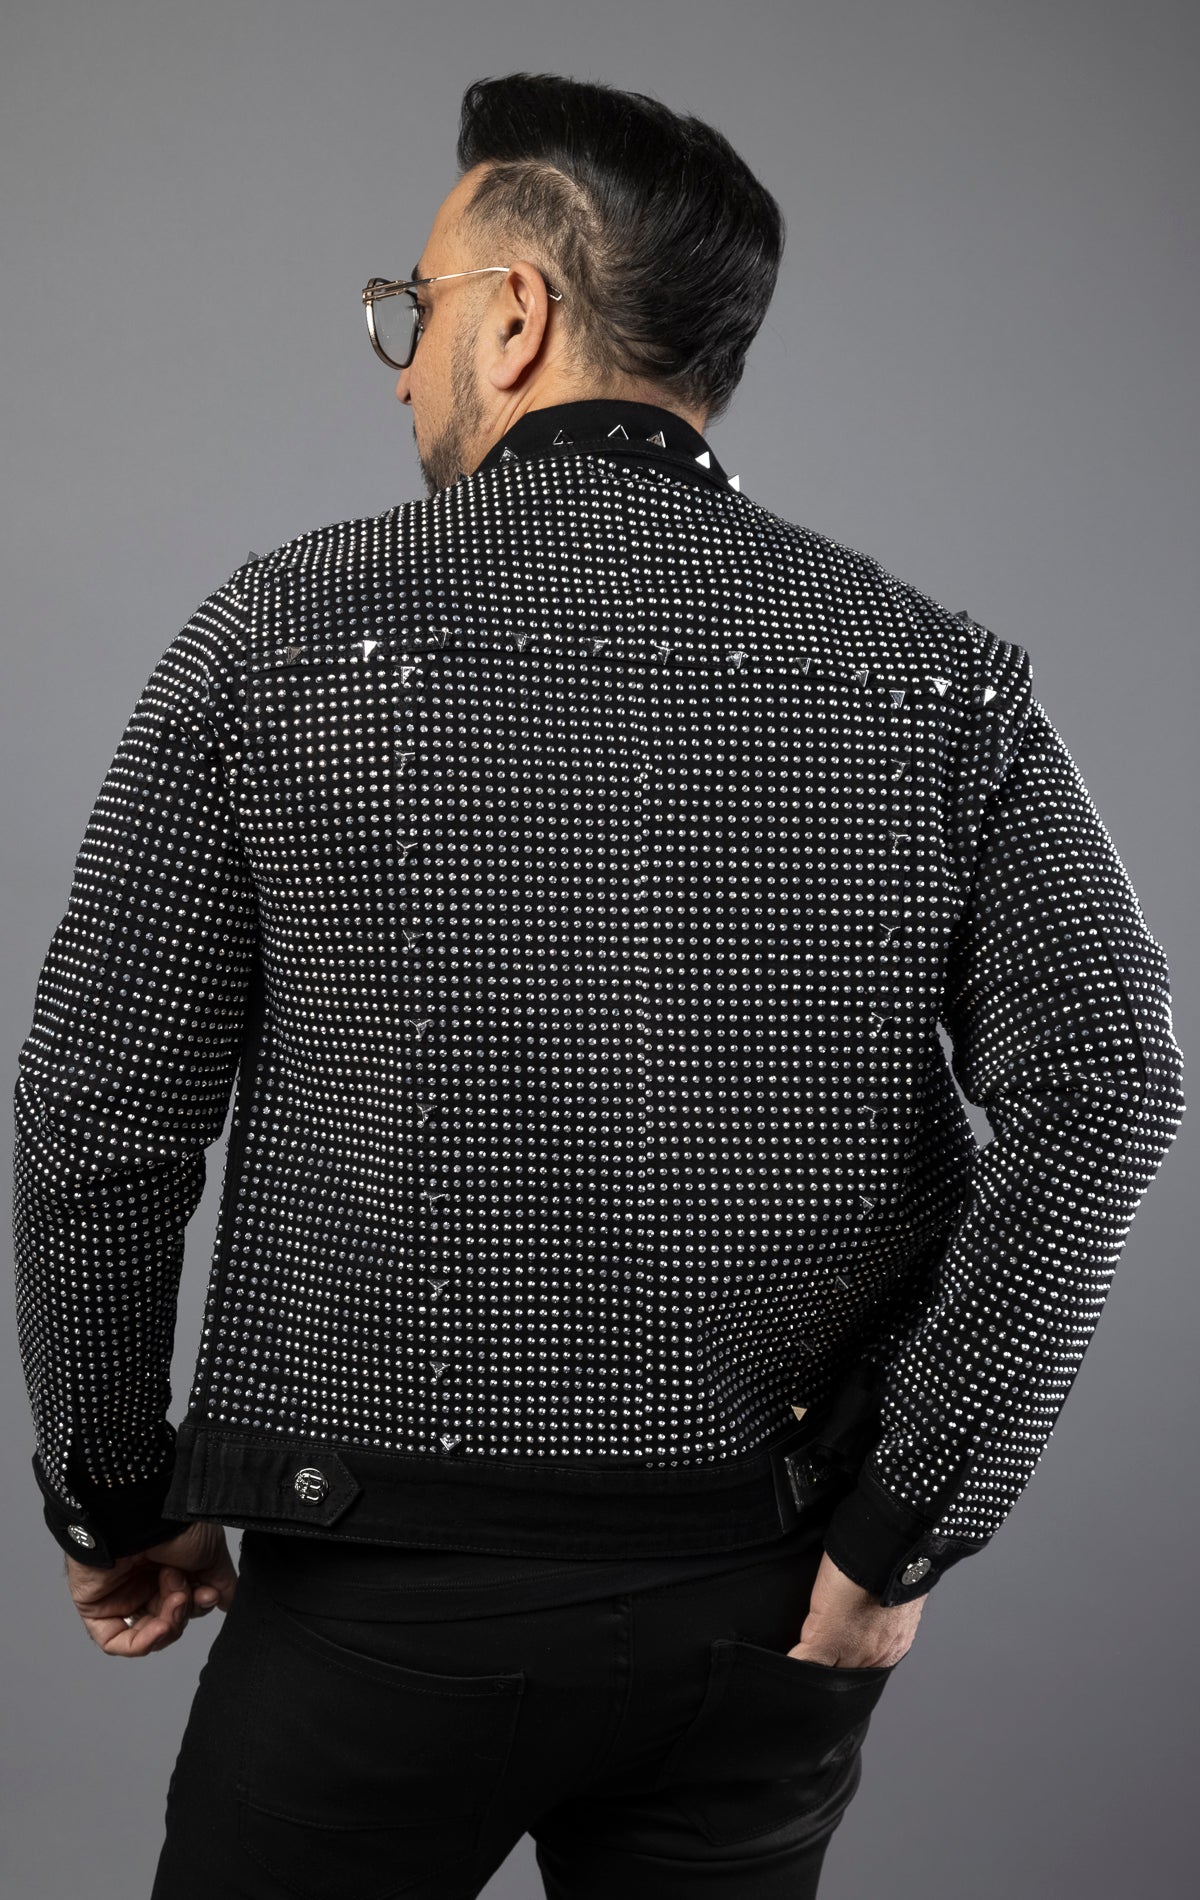 Black stylish jean jacket adorned with crystals and spikes for men.